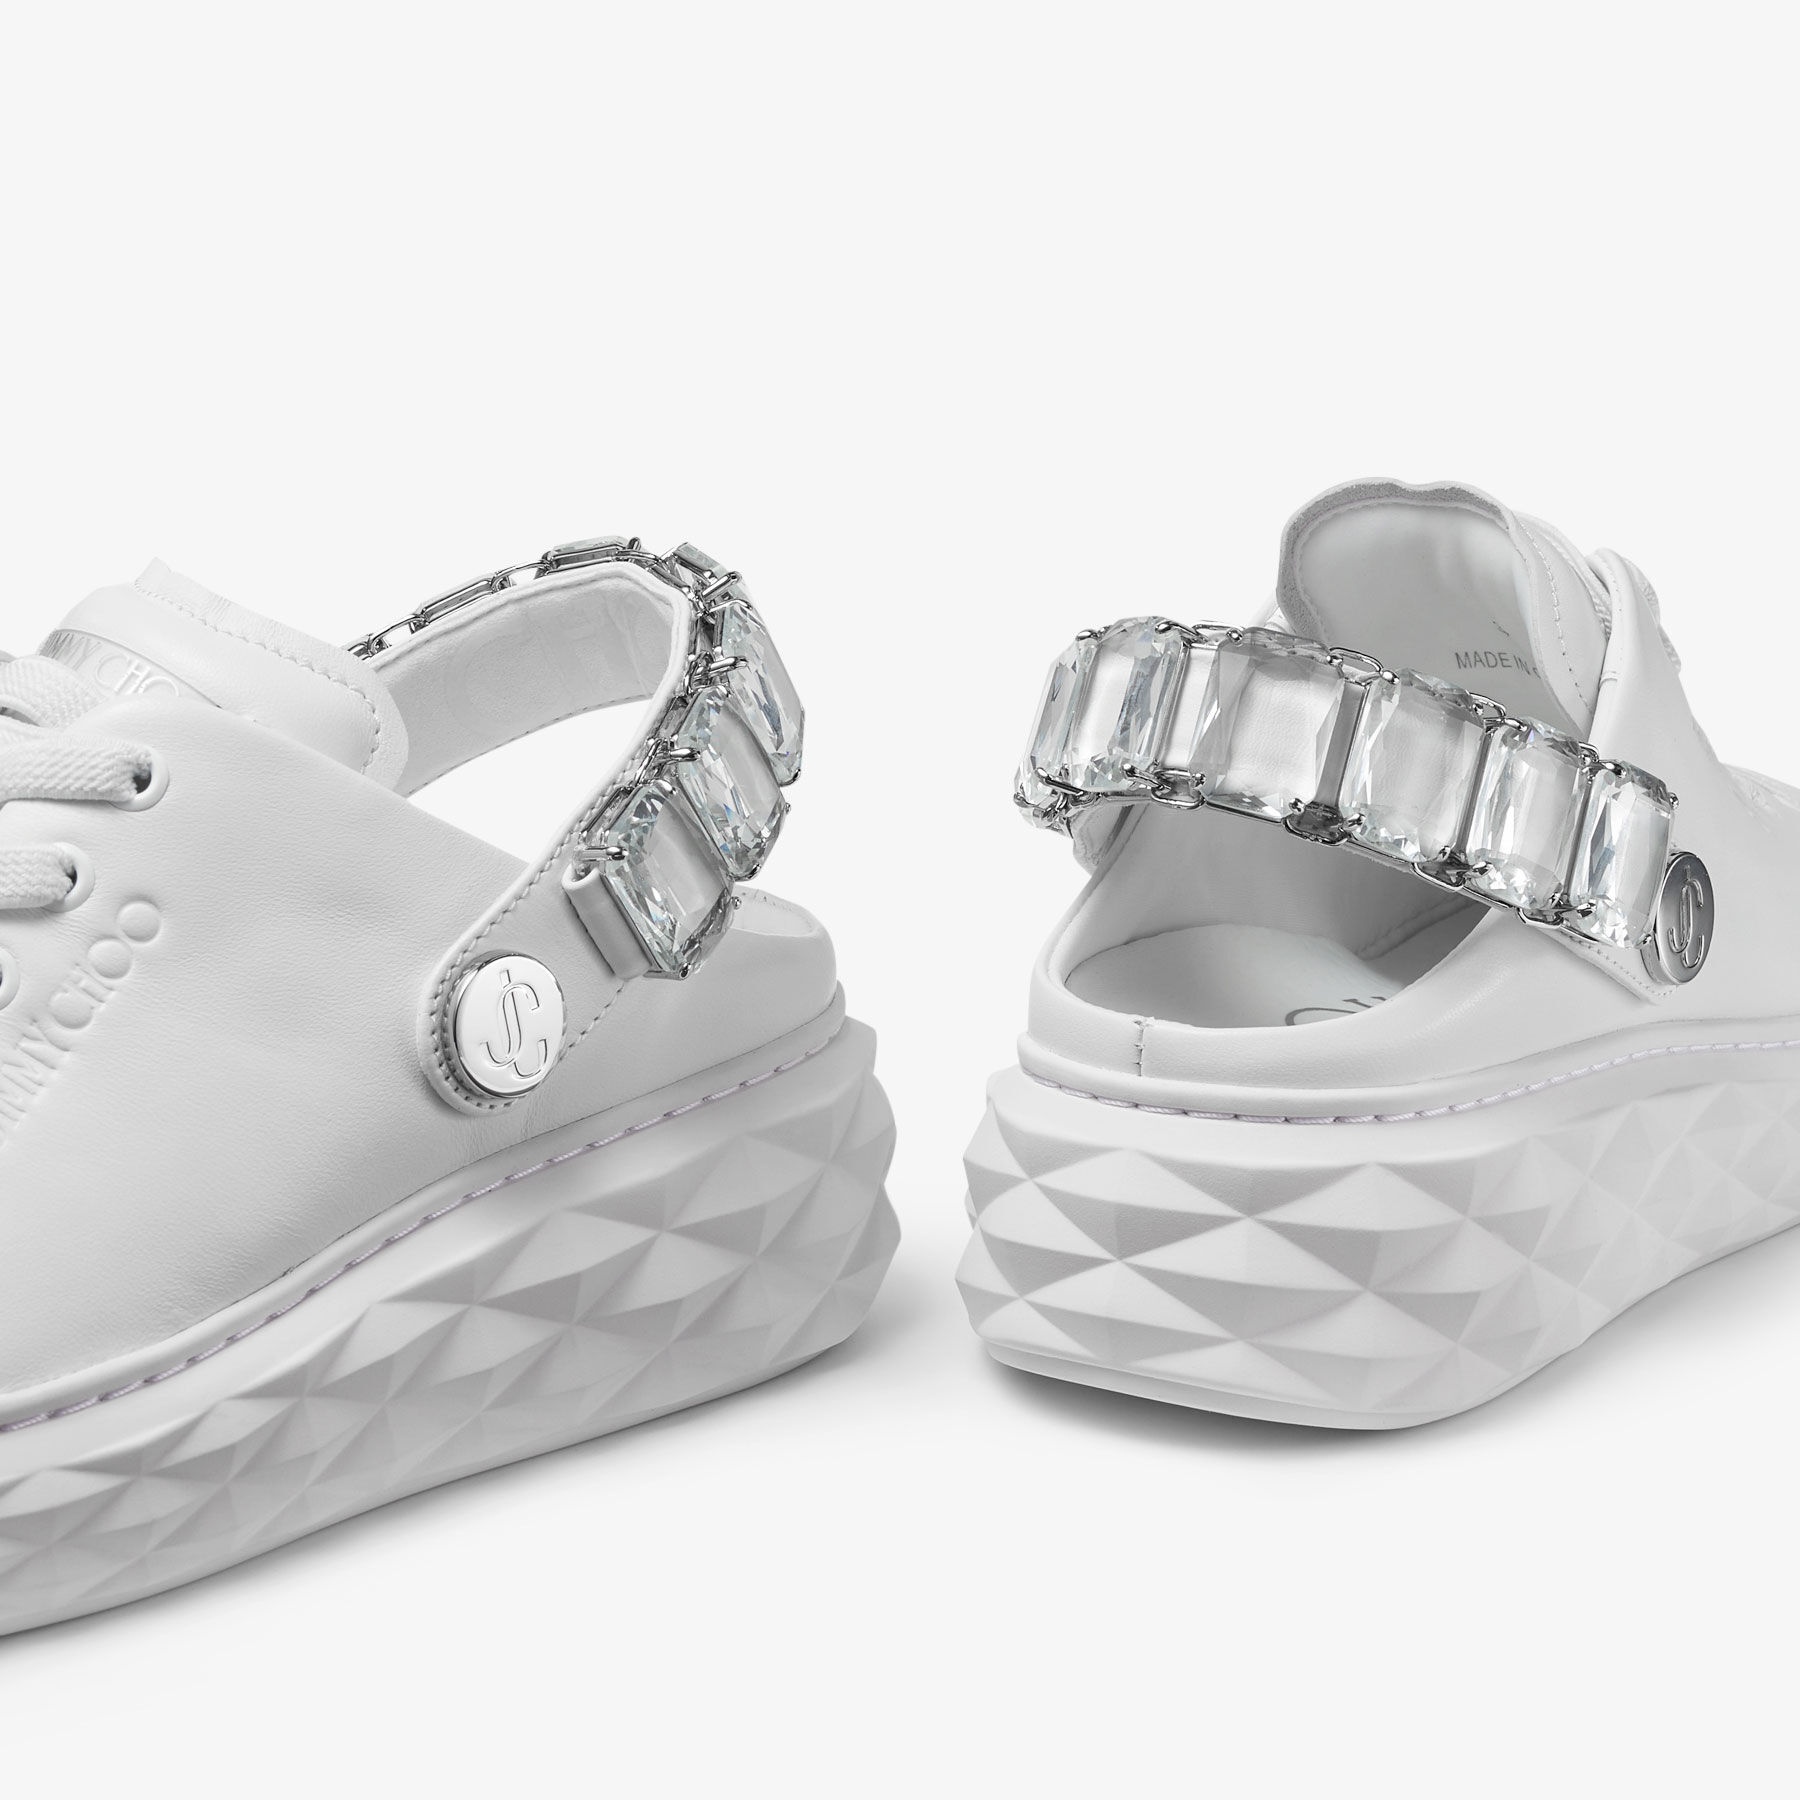 Diamond Maxi Crystal
White Nappa Leather Slipper Trainers with Crystal Strap - 3